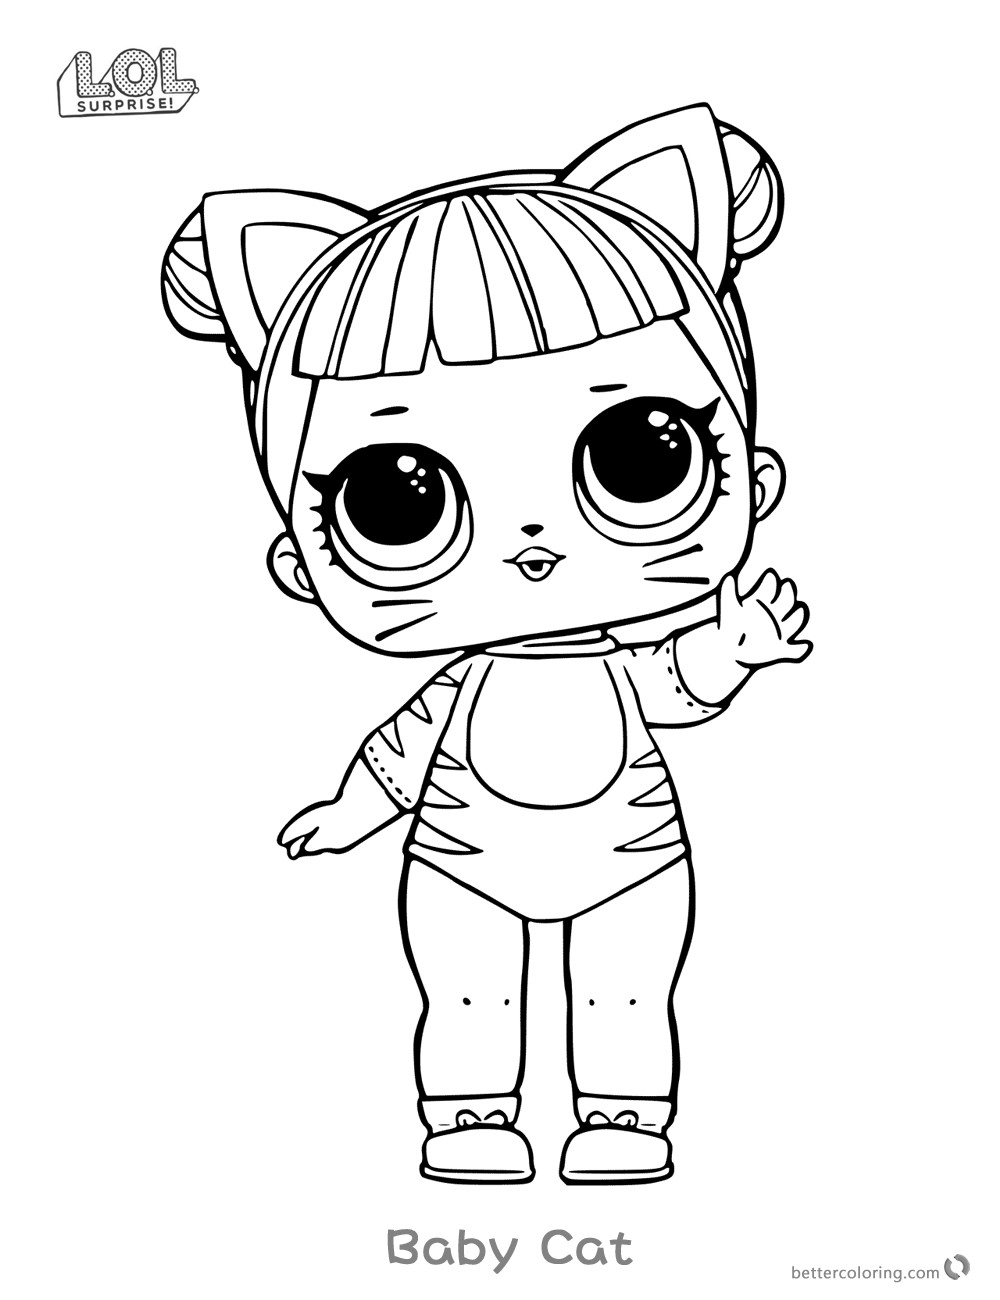 Baby Lol Coloring Pages
 LOL Surprise Doll Coloring Pages Series 1 Baby Cat Free